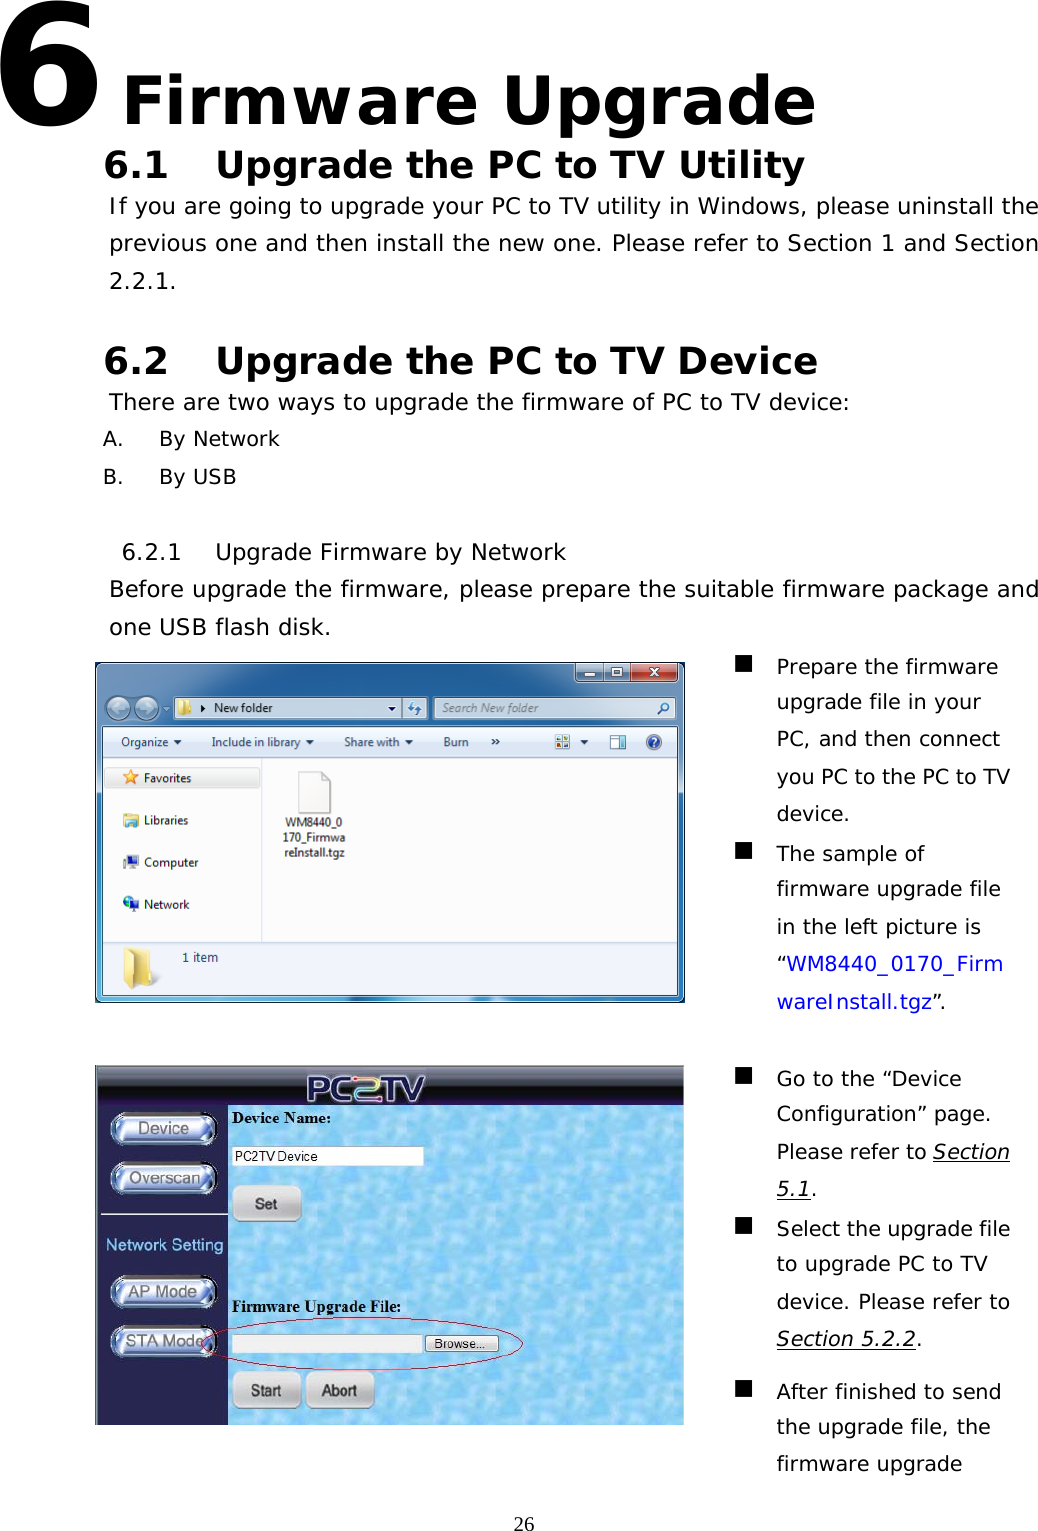   266 Firmware Upgrade 6.1 Upgrade the PC to TV Utility If you are going to upgrade your PC to TV utility in Windows, please uninstall the previous one and then install the new one. Please refer to Section 1 and Section 2.2.1.  6.2 Upgrade the PC to TV Device There are two ways to upgrade the firmware of PC to TV device: A. By Network B. By USB  6.2.1 Upgrade Firmware by Network Before upgrade the firmware, please prepare the suitable firmware package and one USB flash disk.    Prepare the firmware upgrade file in your PC, and then connect you PC to the PC to TV device.  The sample of firmware upgrade file in the left picture is “WM8440_0170_FirmwareInstall.tgz”.    Go to the “Device Configuration” page. Please refer to Section 5.1.  Select the upgrade file to upgrade PC to TV device. Please refer to Section 5.2.2.  After finished to send the upgrade file, the firmware upgrade 